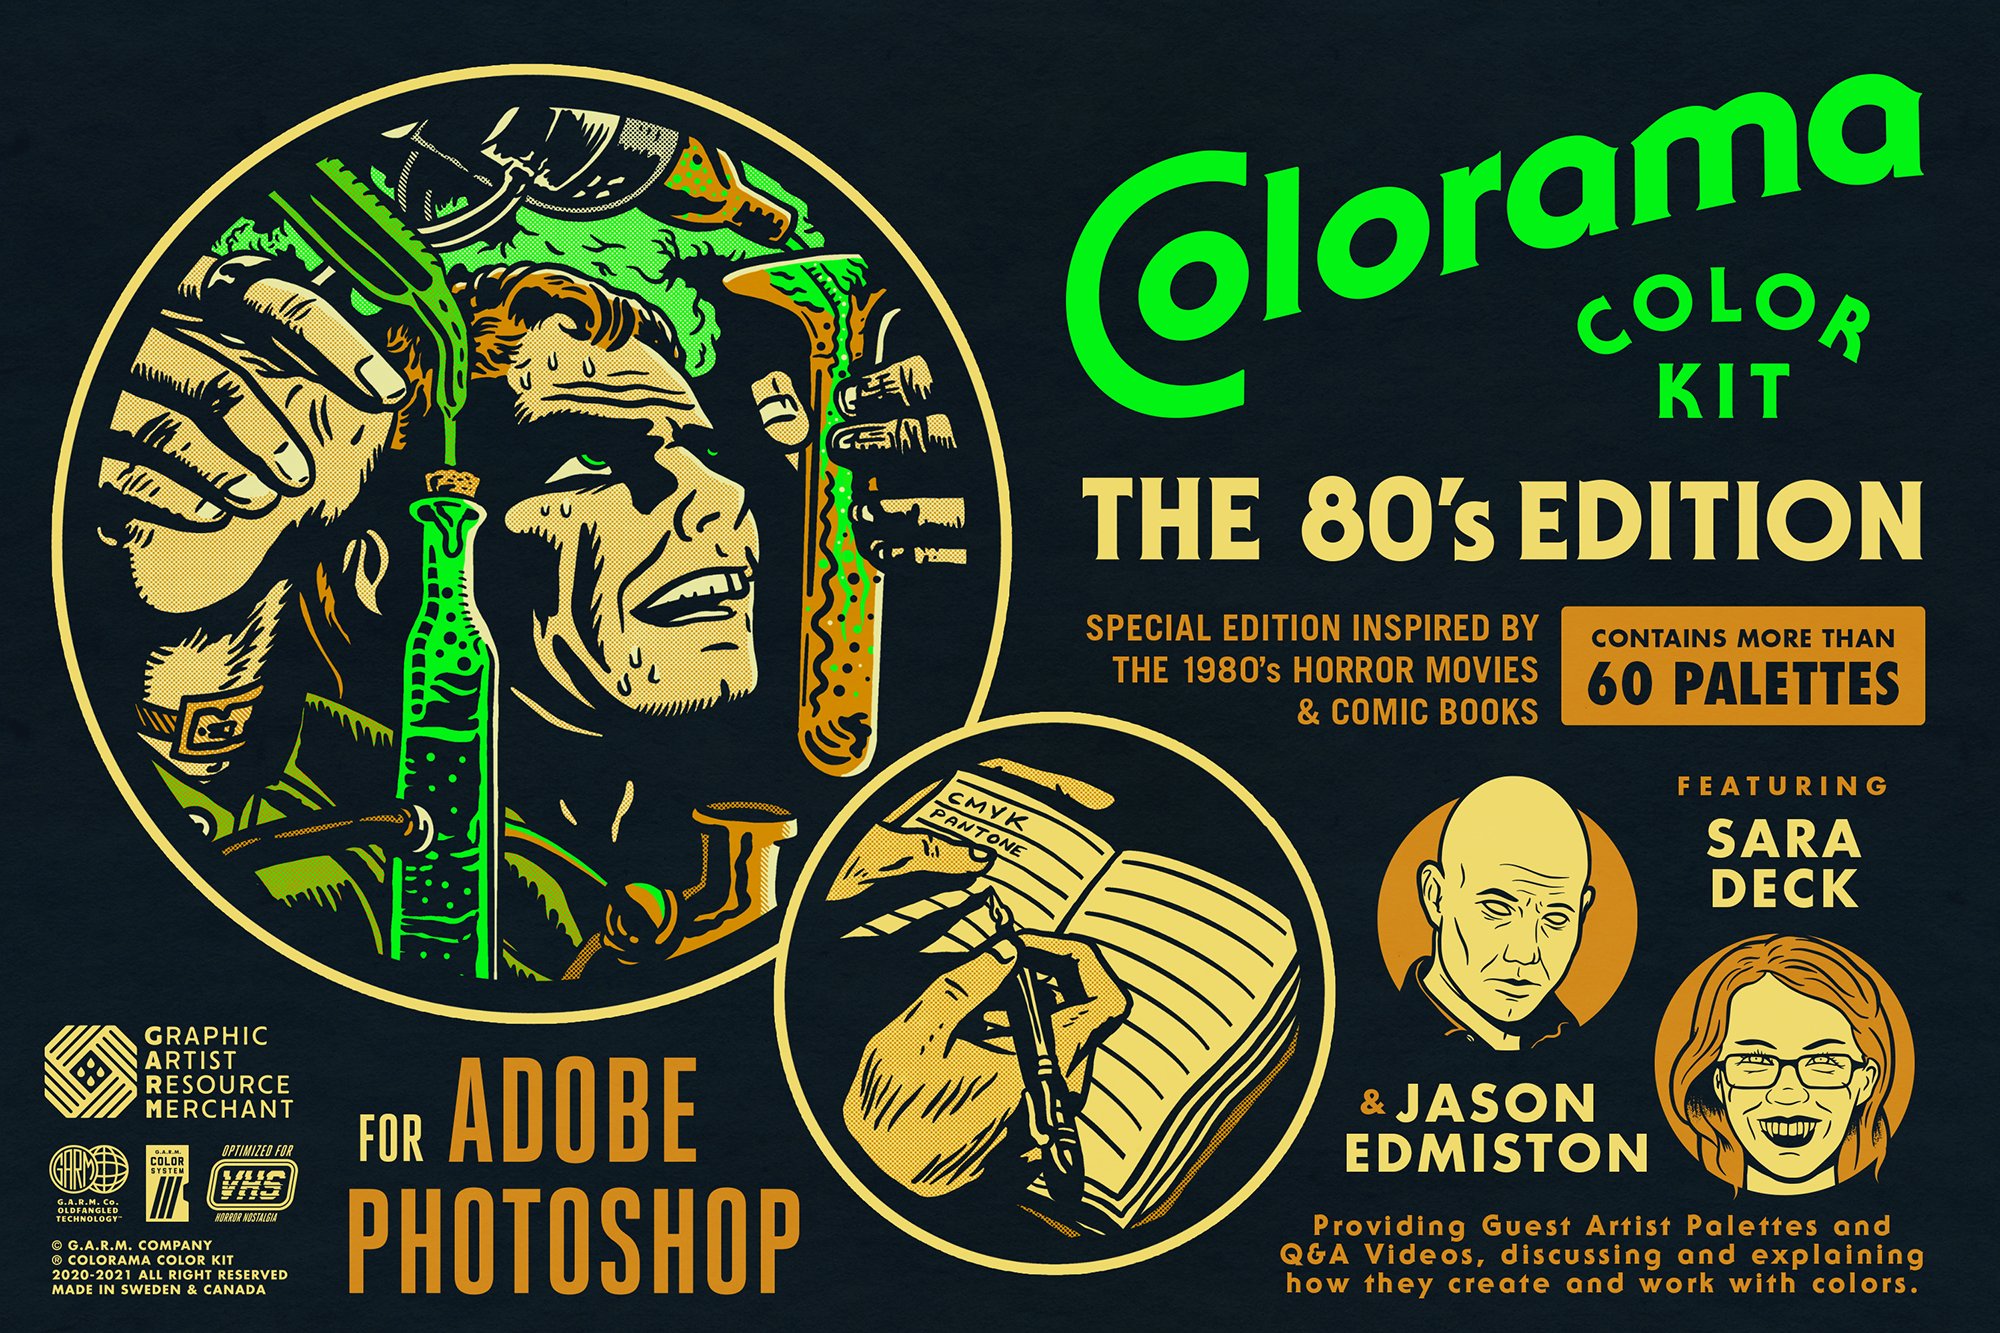 Colorama: 80's Edition (Photoshop)cover image.